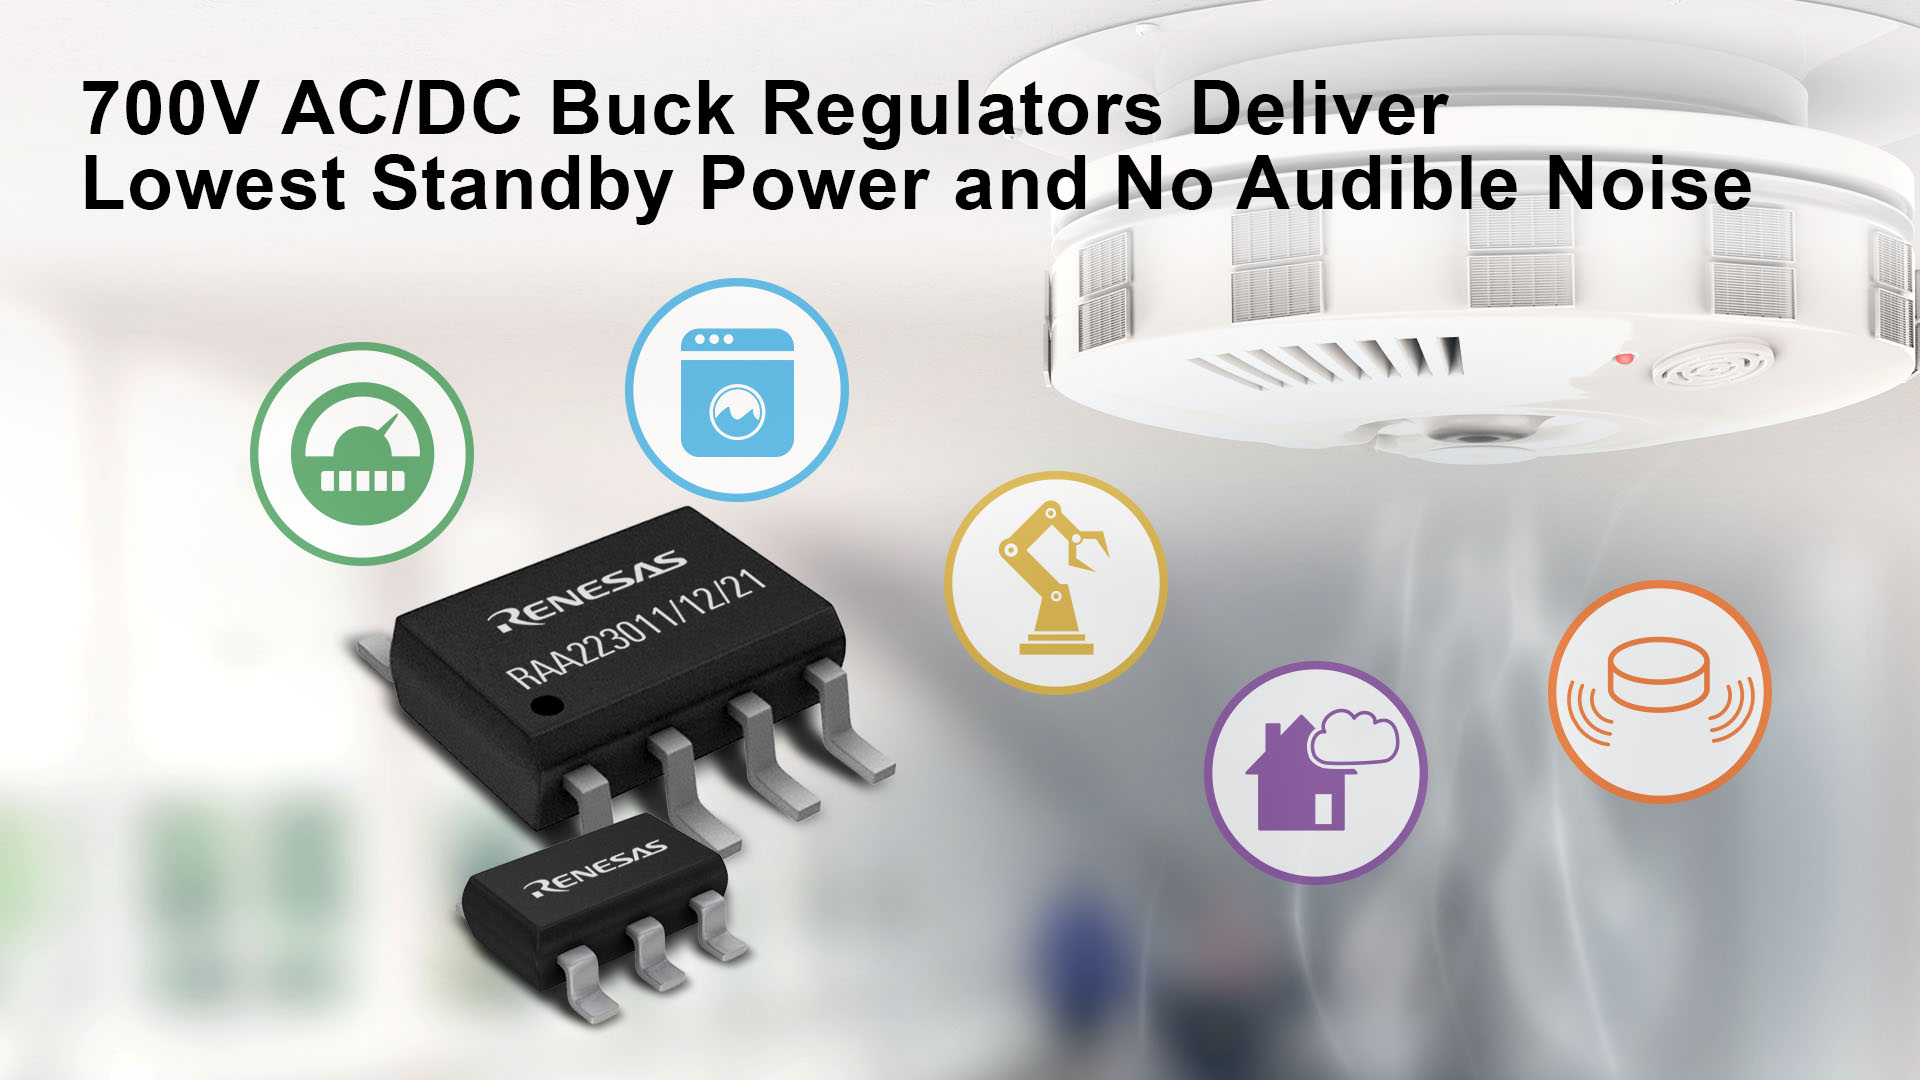 700V Buck Regulators w/ Unmatched Features for Home Appliances